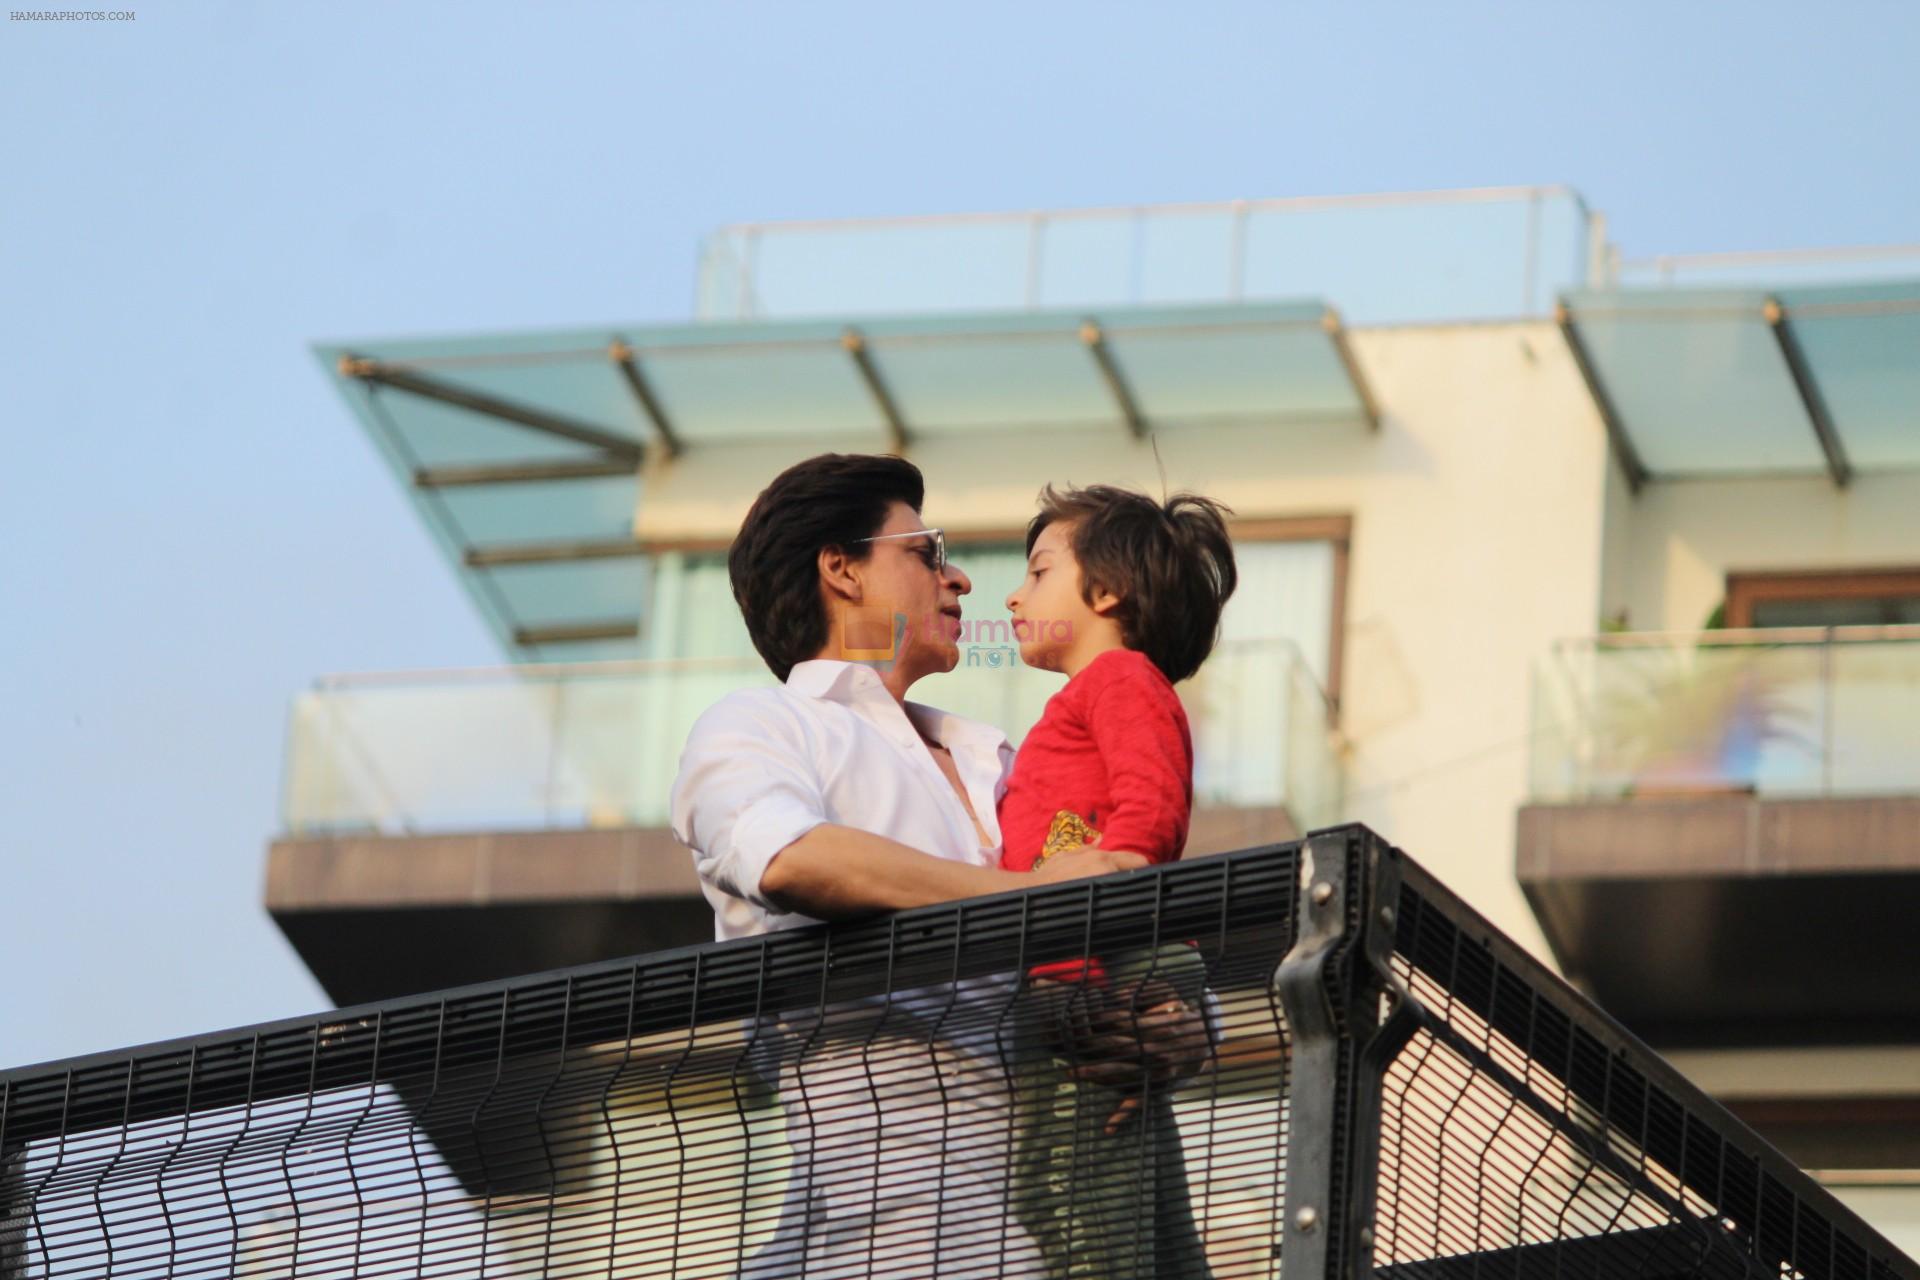 Shahrukh Khan with son Abram waves the fans on Eid at his bandra residence on 5th June 2019